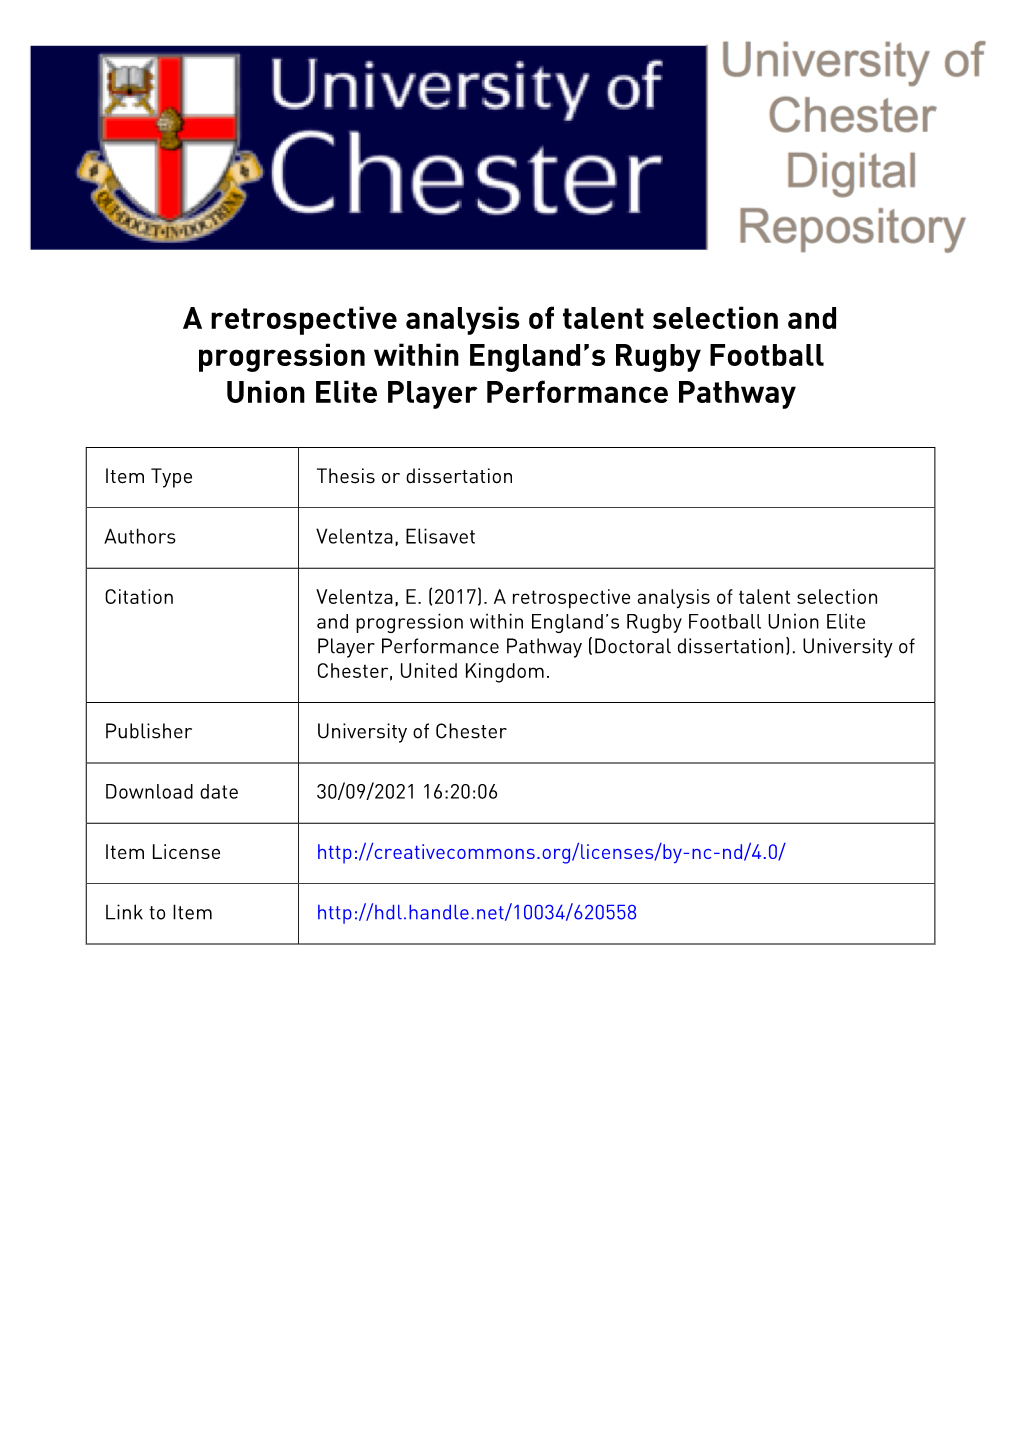 A Retrospective Analysis of Talent Selection and Progression Within England’S Rugby Football Union Elite Player Performance Pathway